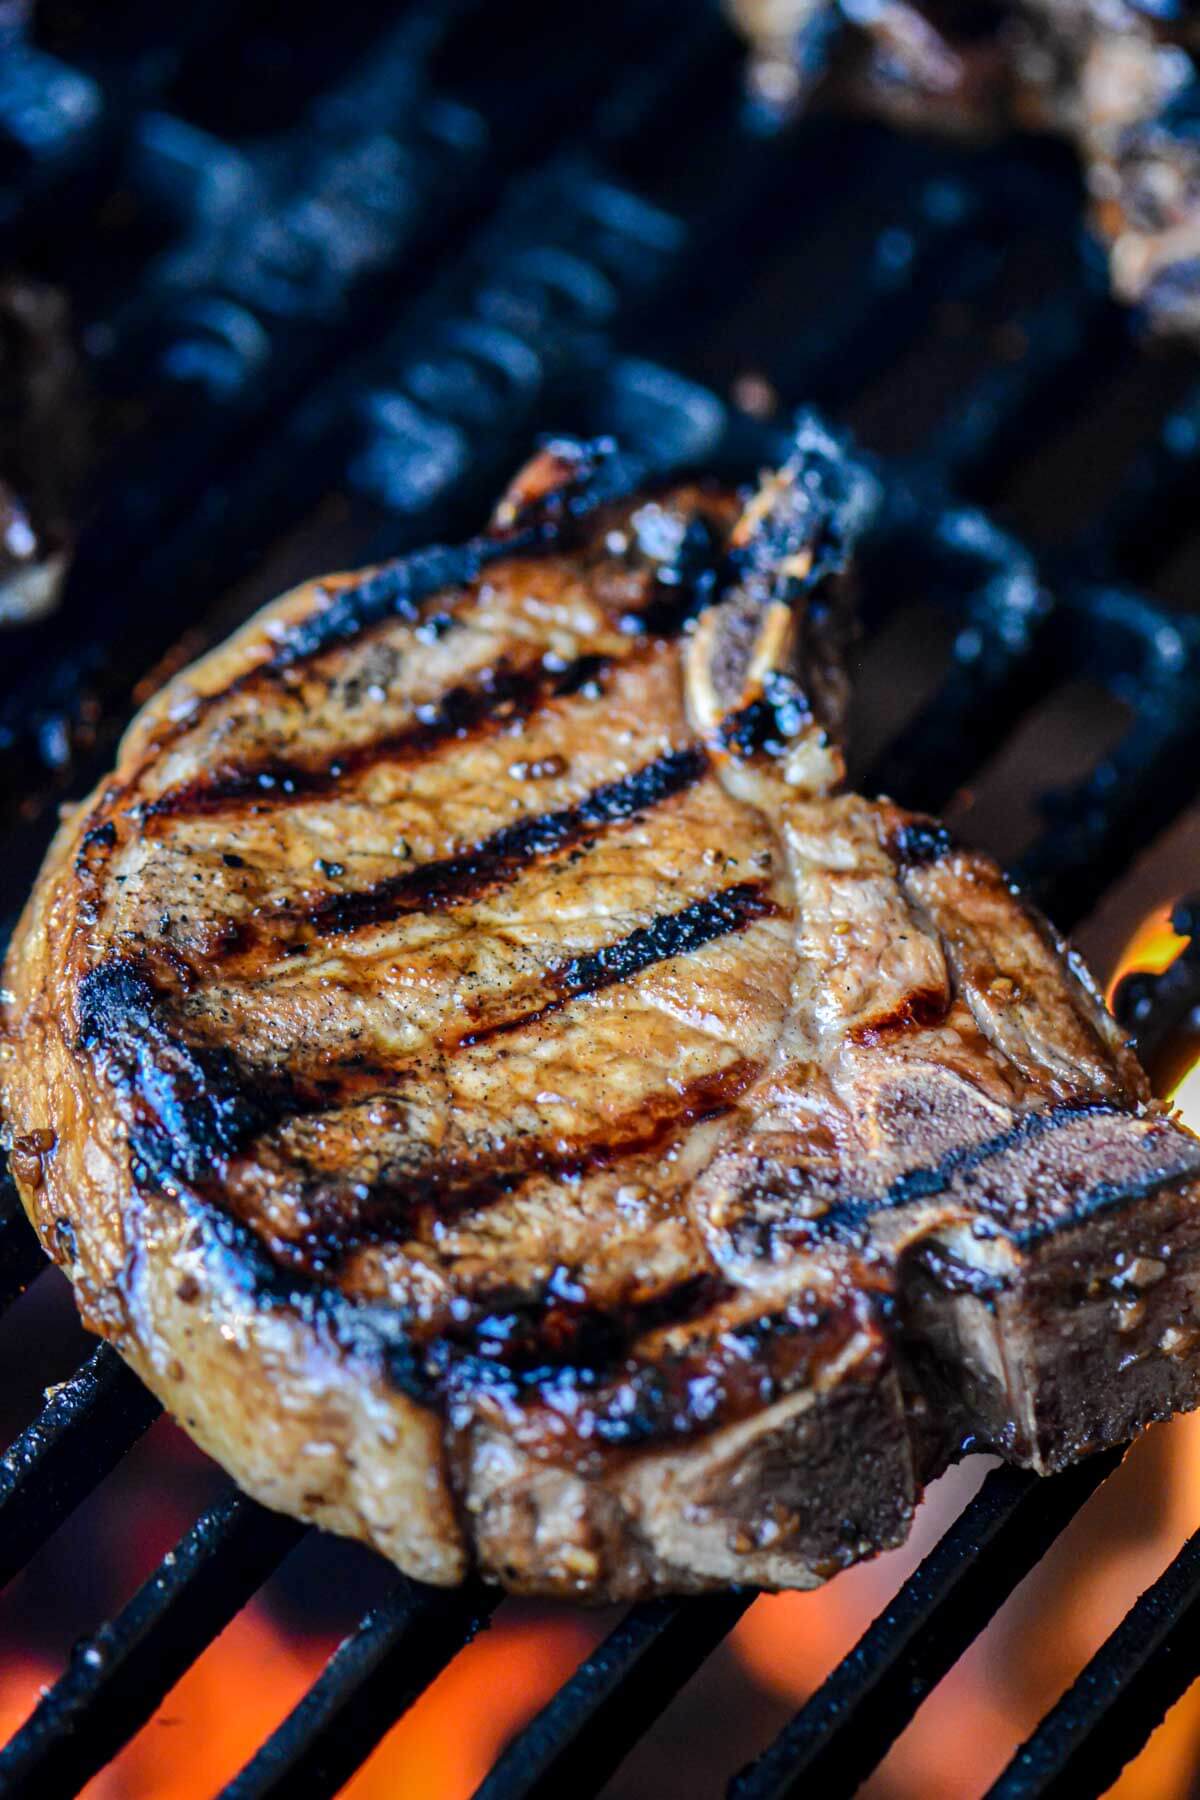 Large pork chop on the grill grate over orange charcoal and covered in a delicious pork marinade.